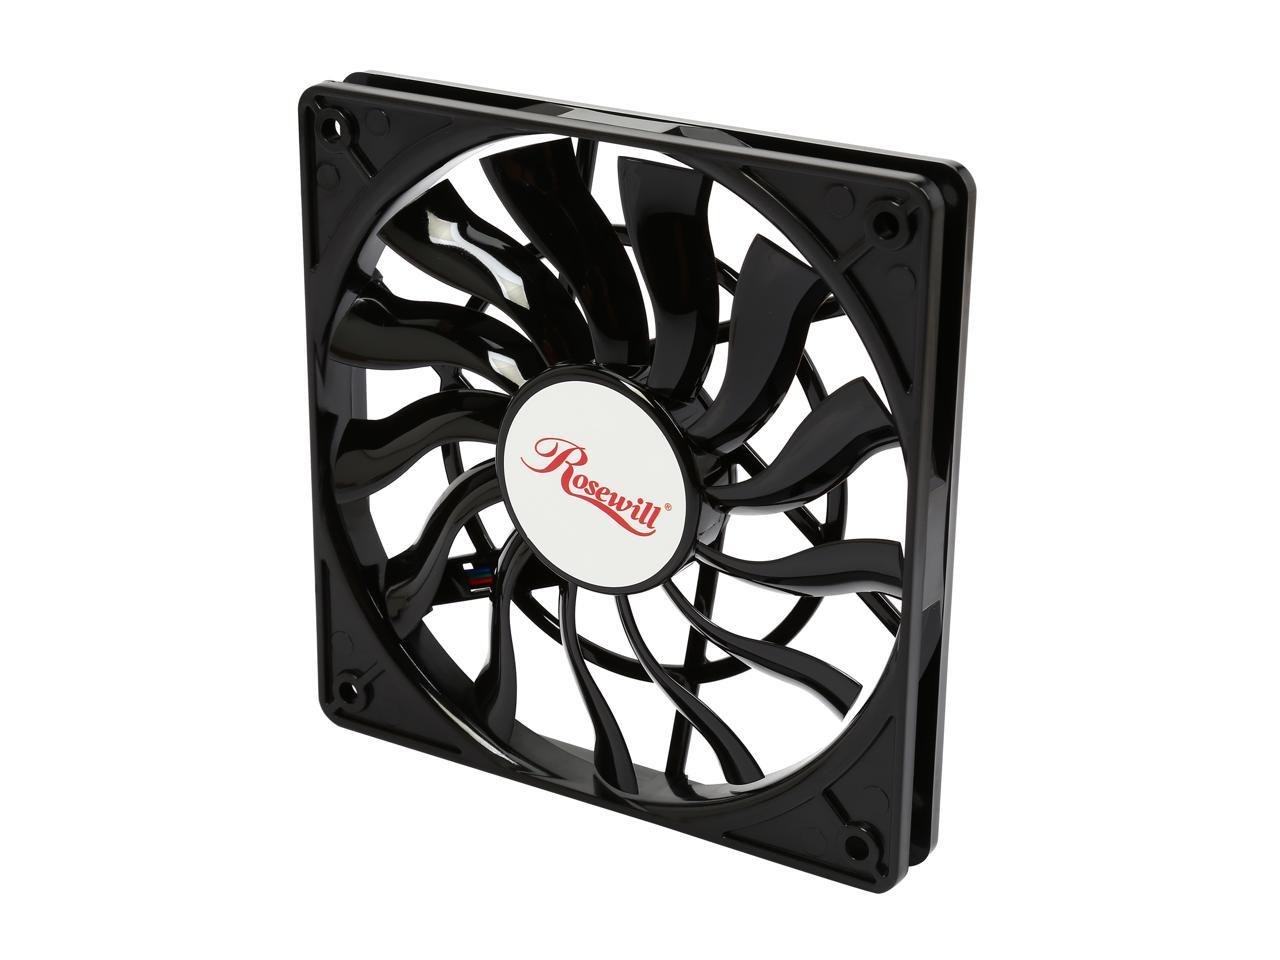 Rosewill RASF-141213 - 120mm Computer Case Cooling Fan - Ultra Slim, 15mm Thickness with Pulse Width Modulation (PWM) Speed Control & Long Life Sleeve Bearing